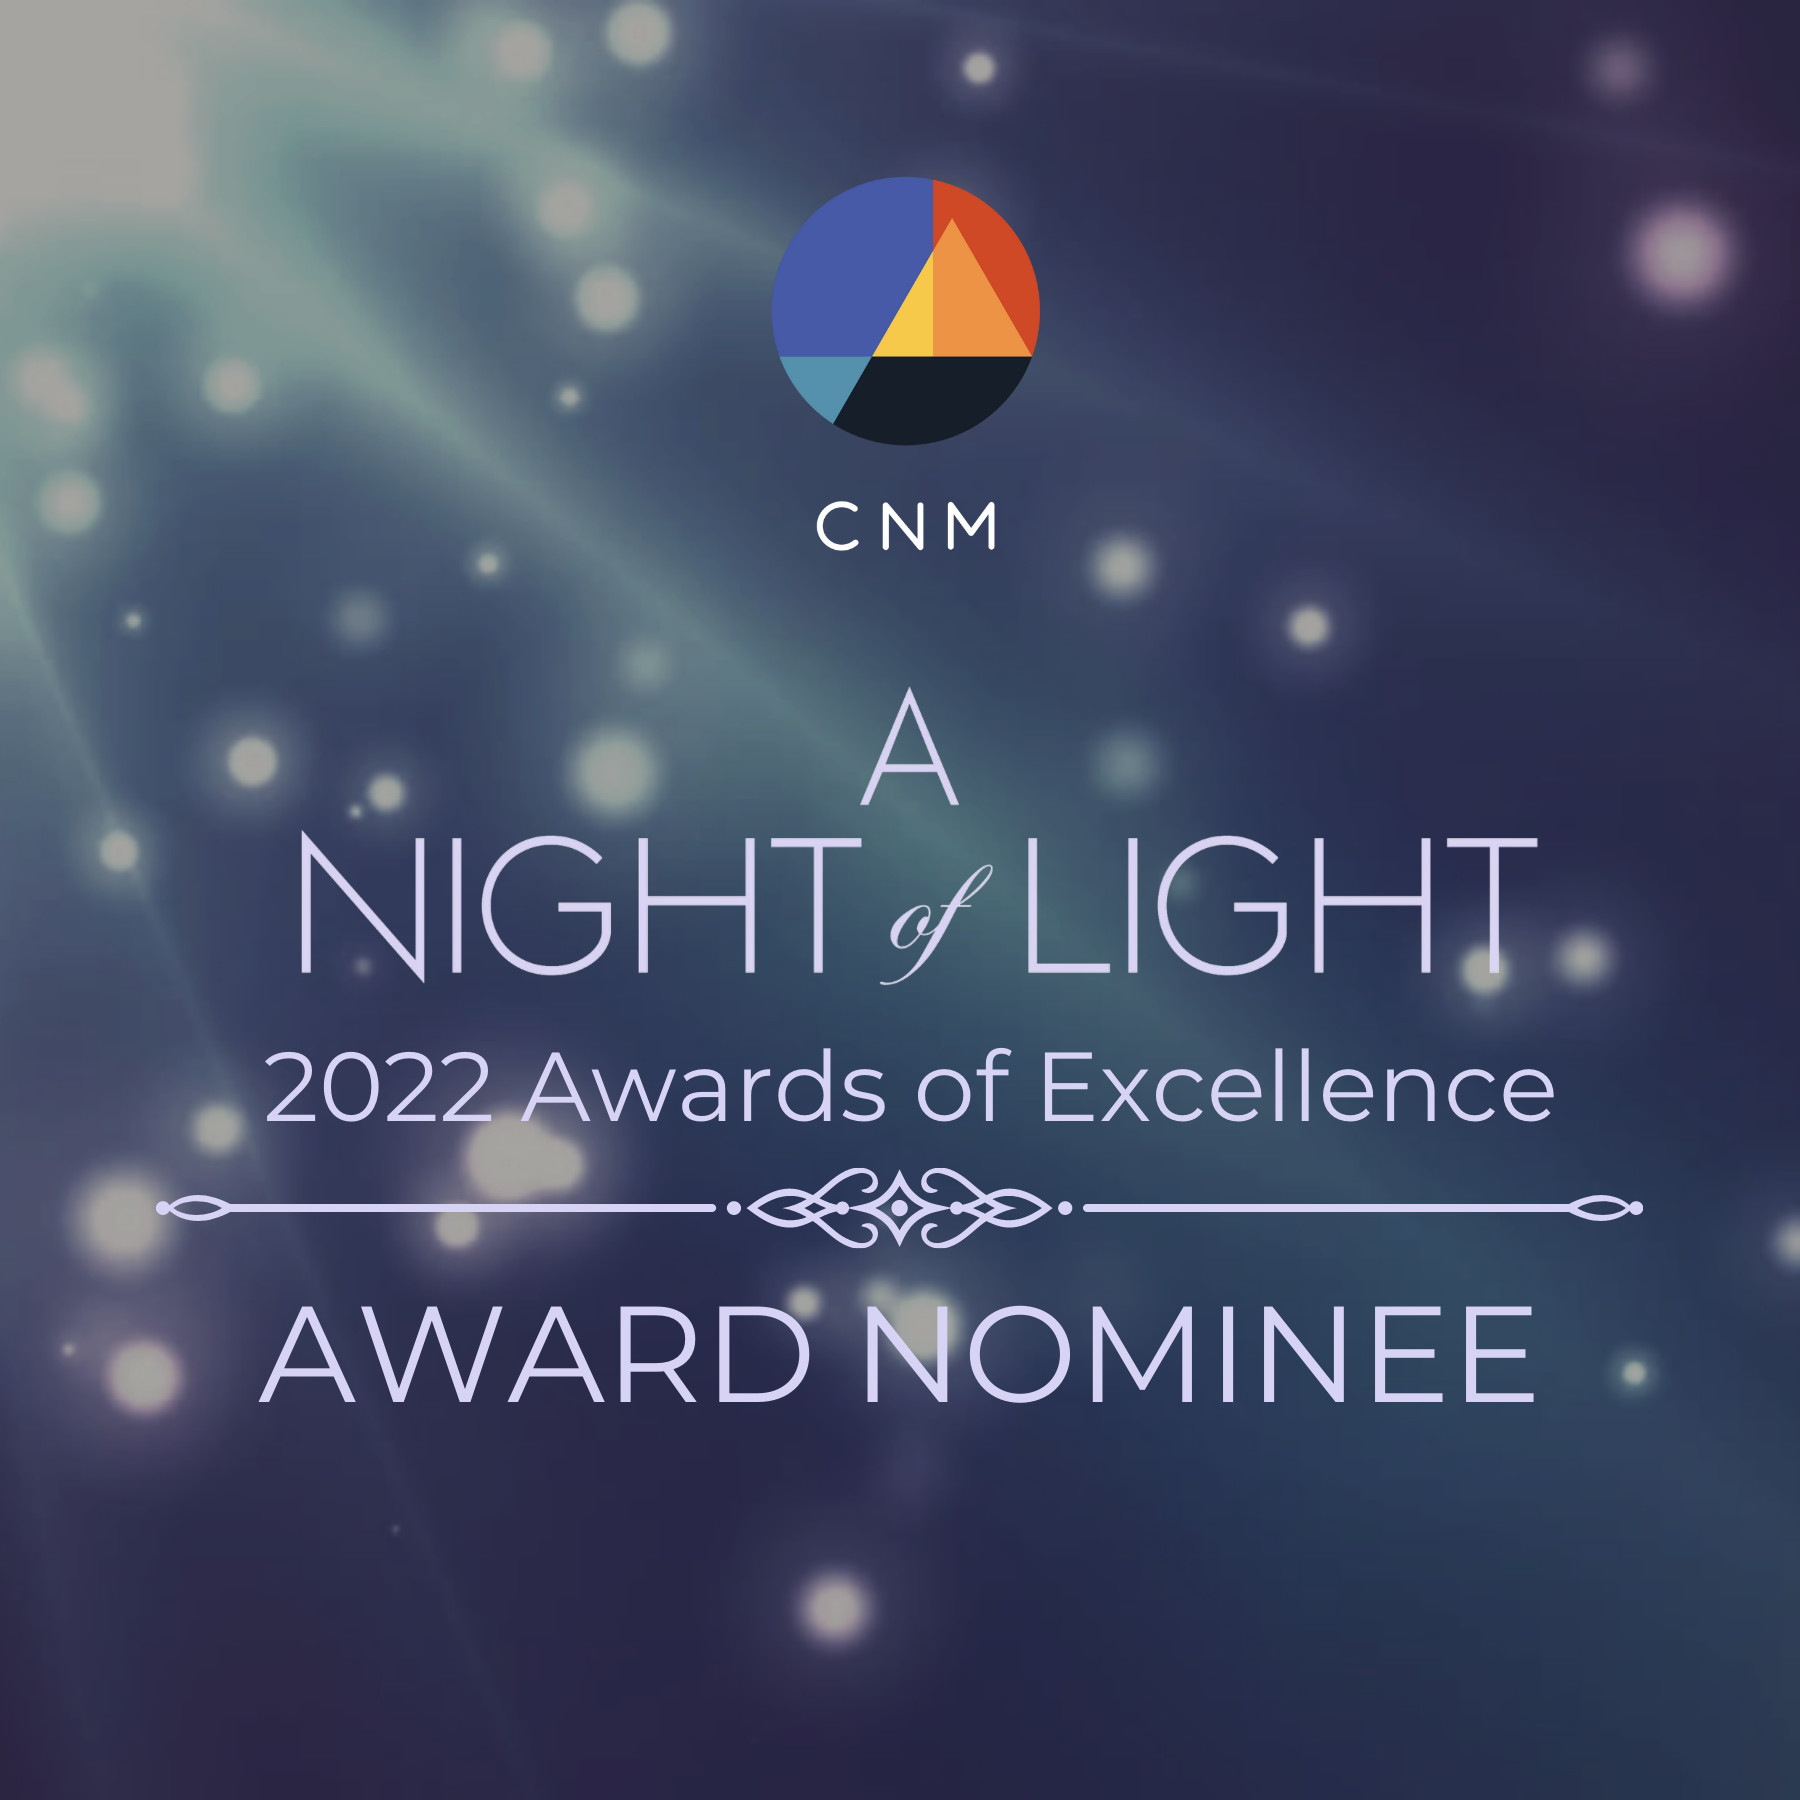 CNM A Night of Light Awards of Excellence 2022